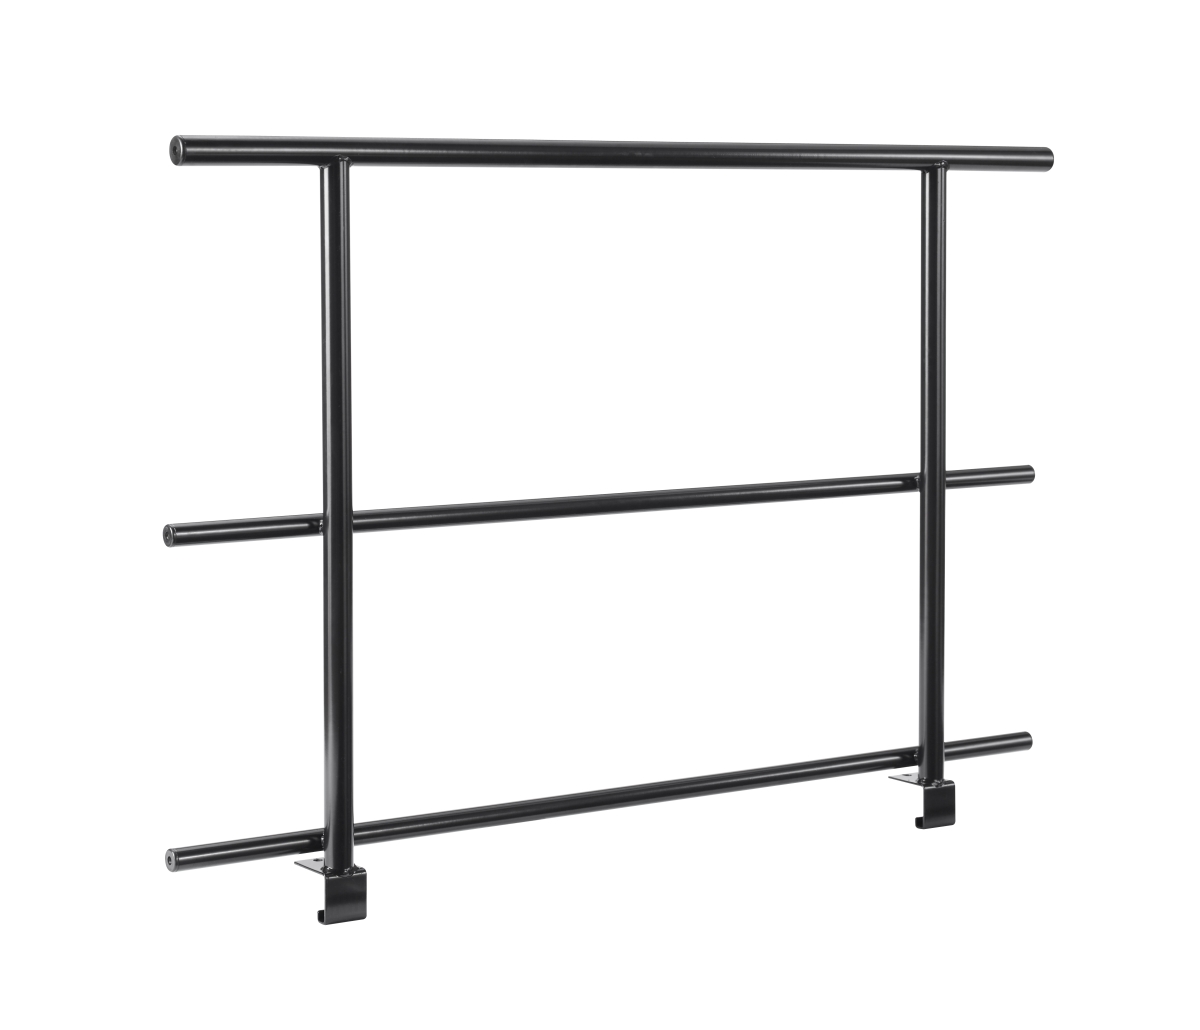 Grs36 36 In. W Guard Rails For Stages